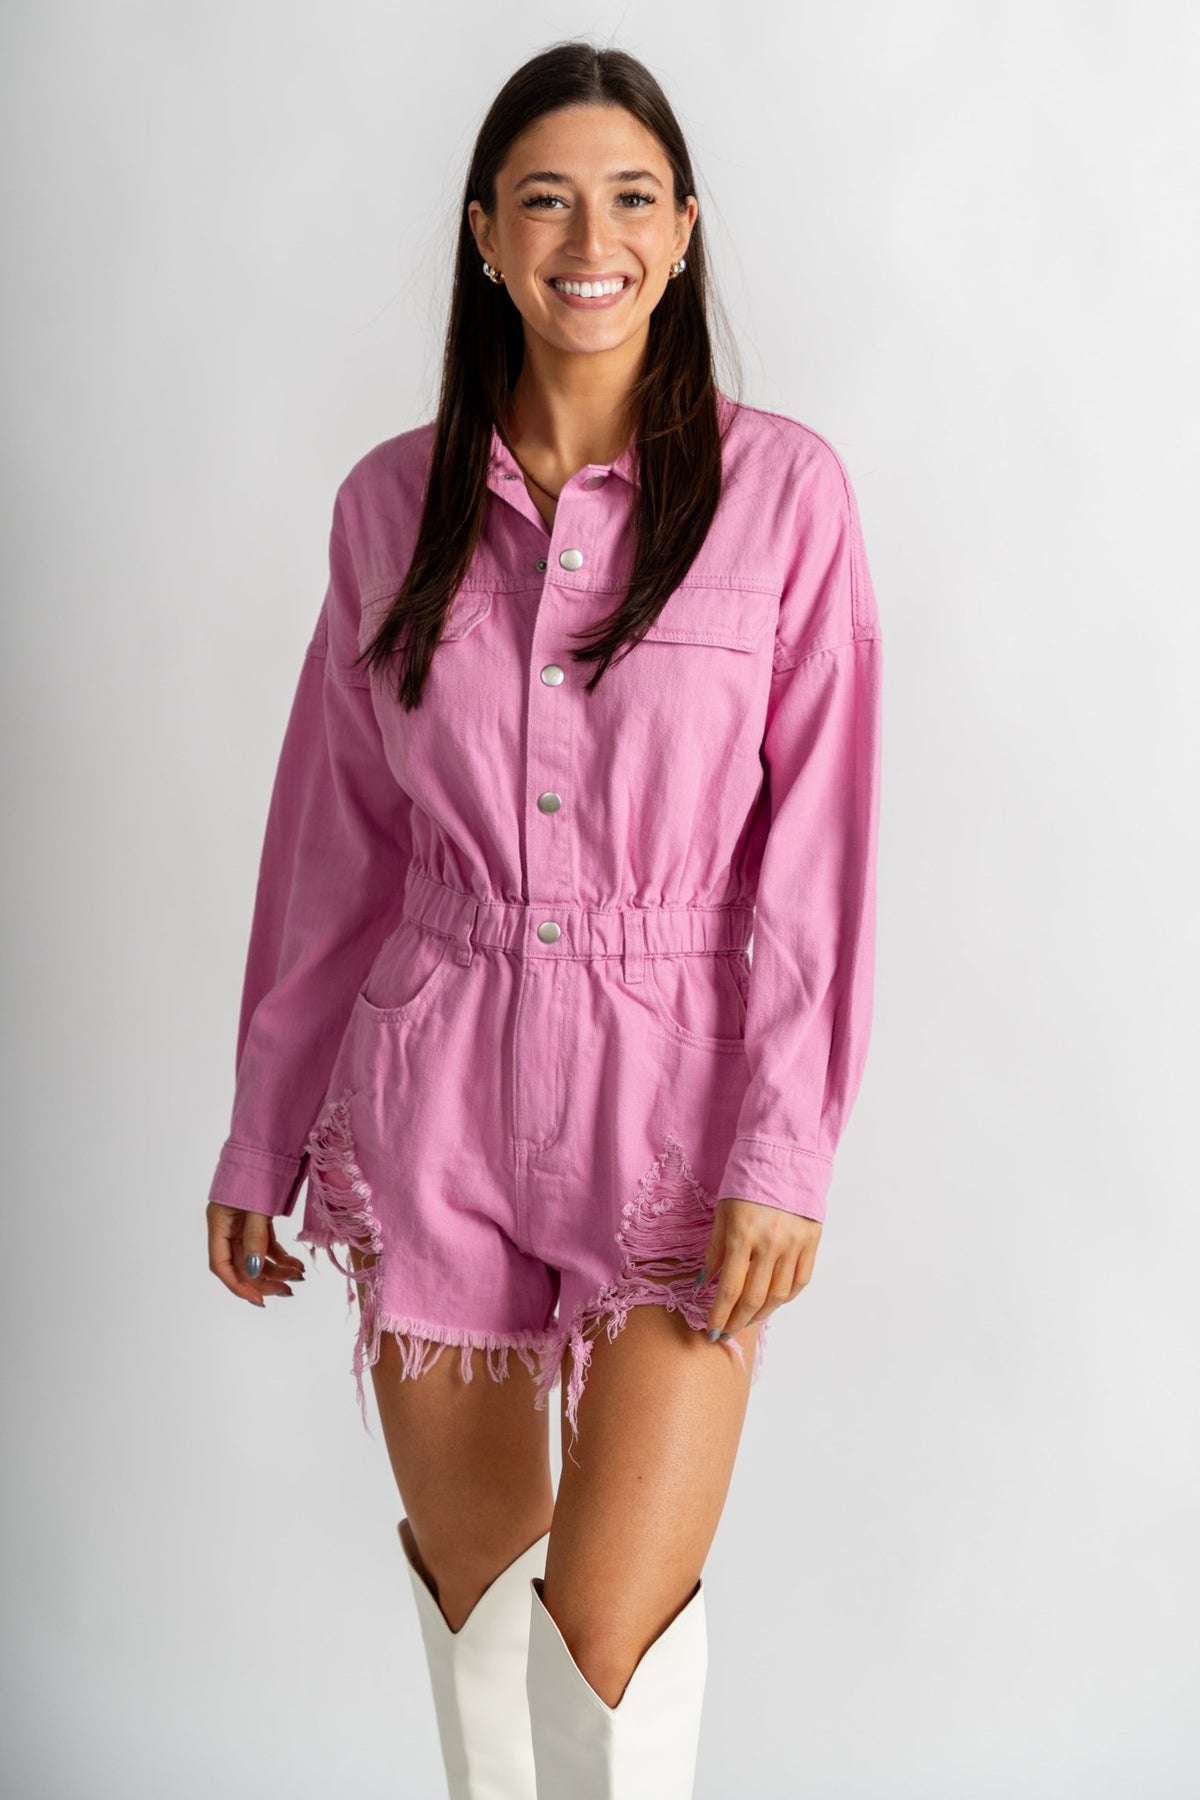 Distressed long sleeve denim romper rose bloom - Trendy T-Shirts for Valentine's Day at Lush Fashion Lounge Boutique in Oklahoma City